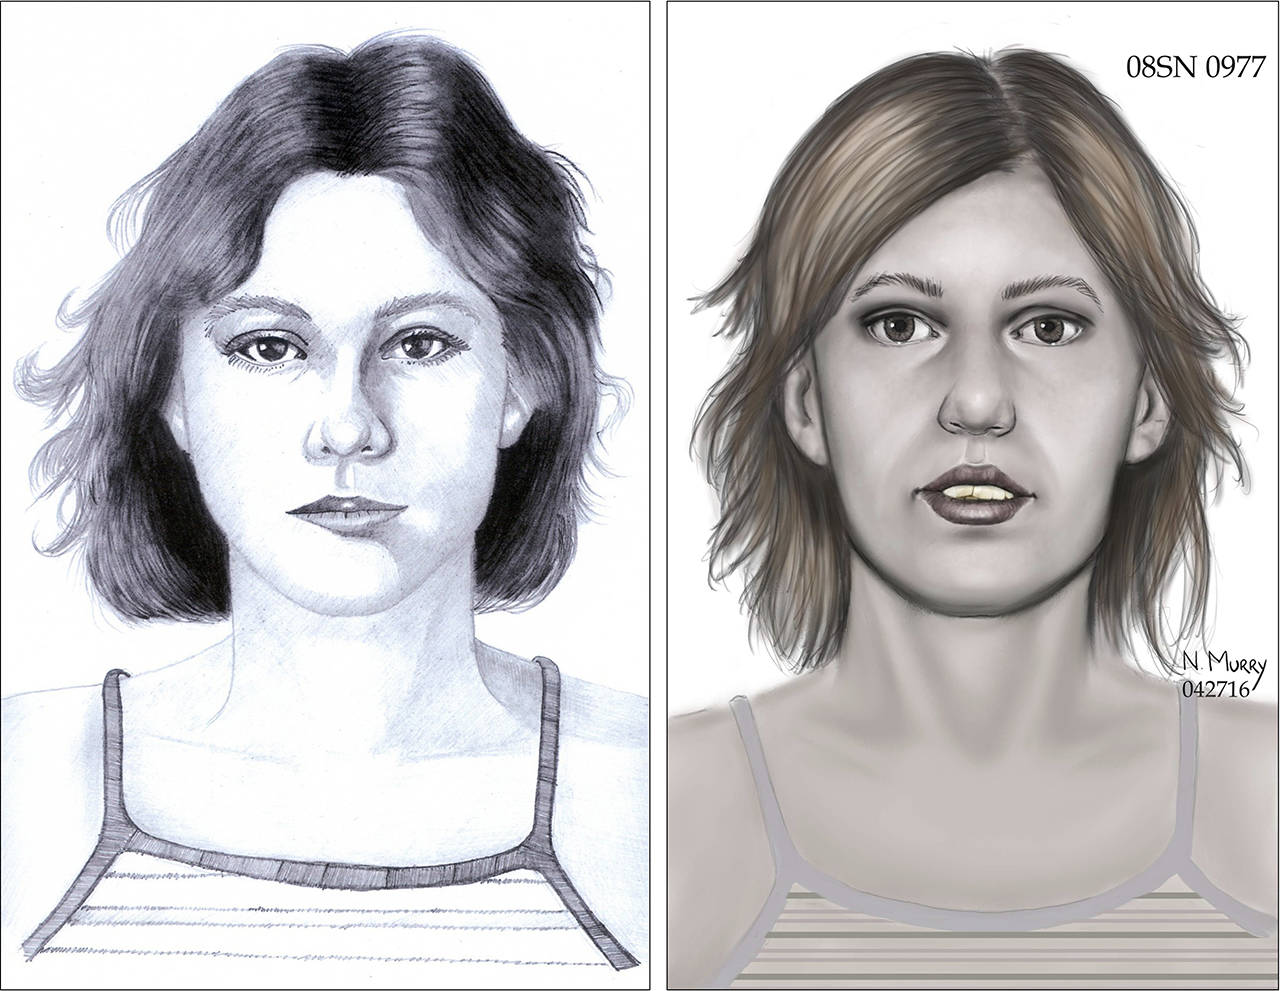 Berry pickers came across this young woman’s body on Aug. 14, 1977, in a wooded area in south Everett. The sketch on the left was drawn by John Hinds in 2008. The sketch on the right was drawn by Natalie Murry in 2016. Both are based on reconstruction of the unidentified woman’s skull. (Snohomish County Sheriff’s Office)